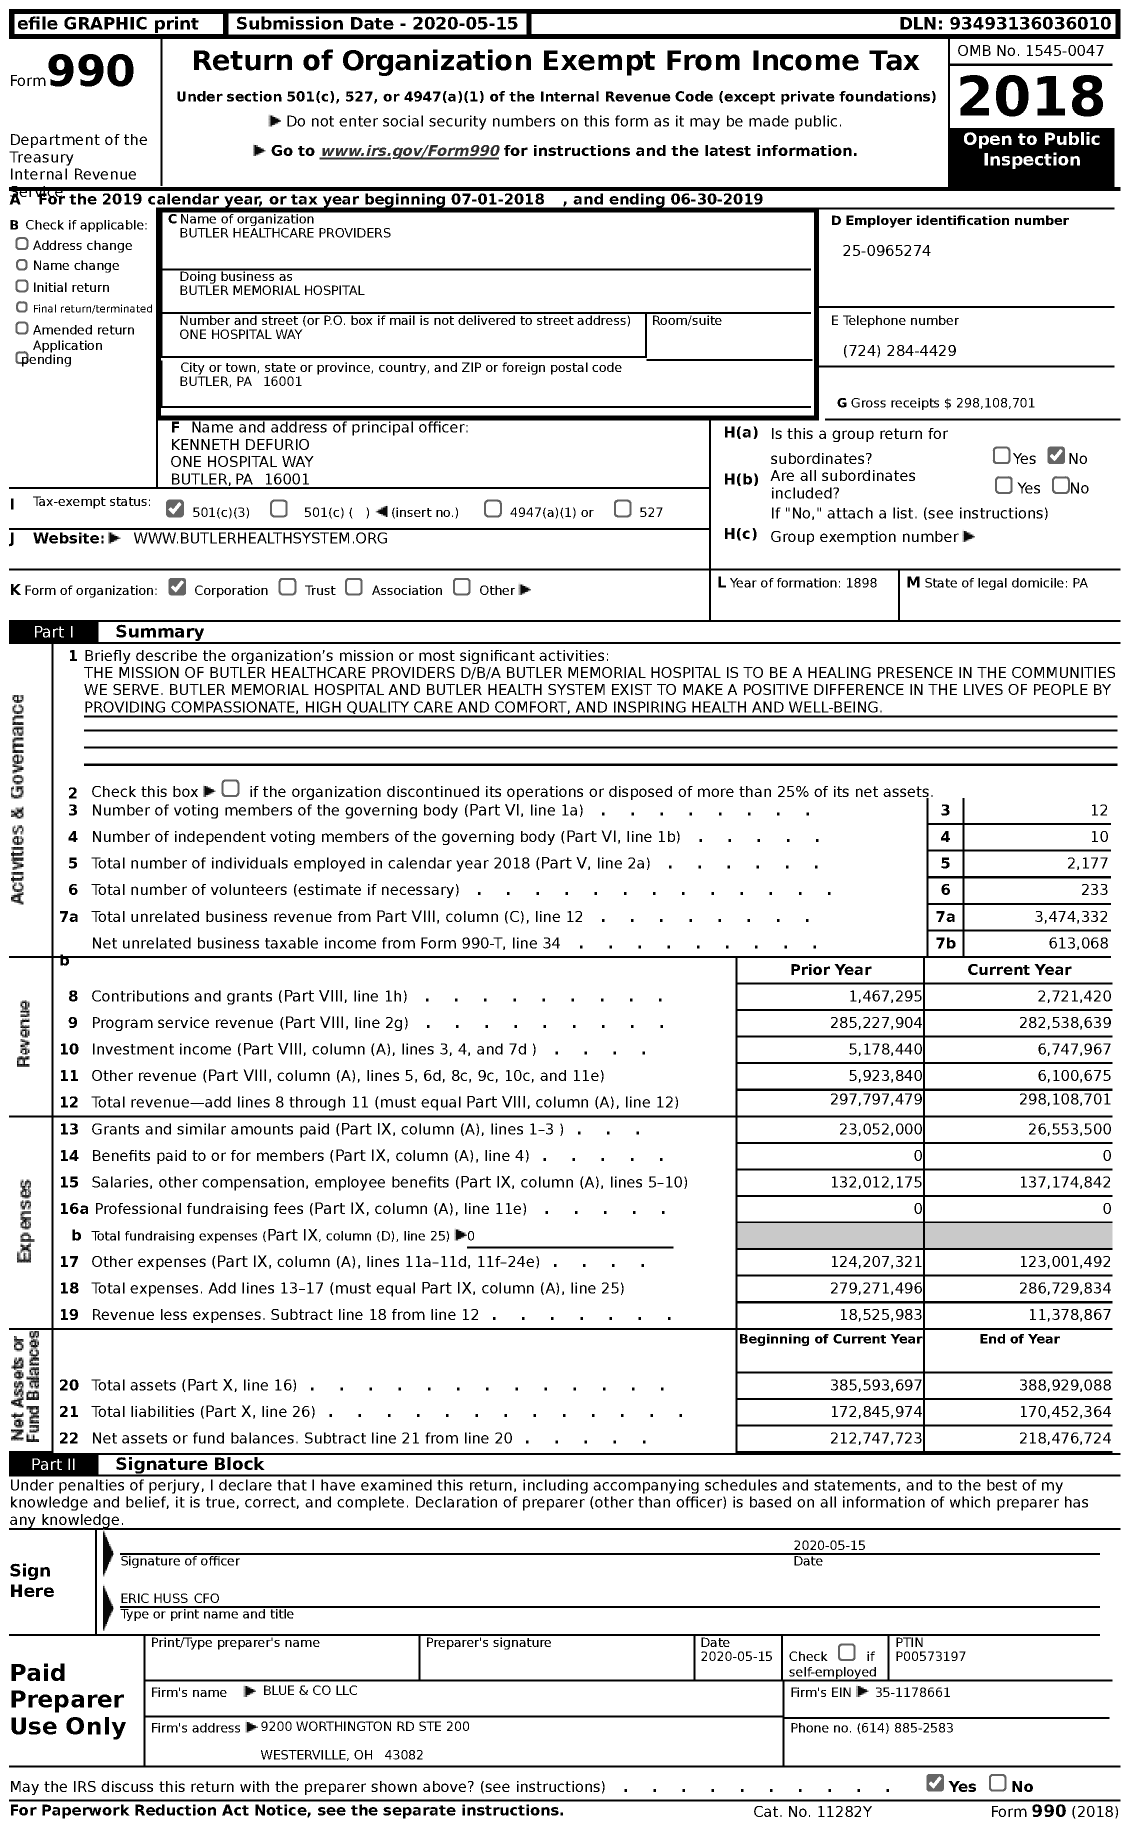 Image of first page of 2018 Form 990 for Butler Health System (BHS)